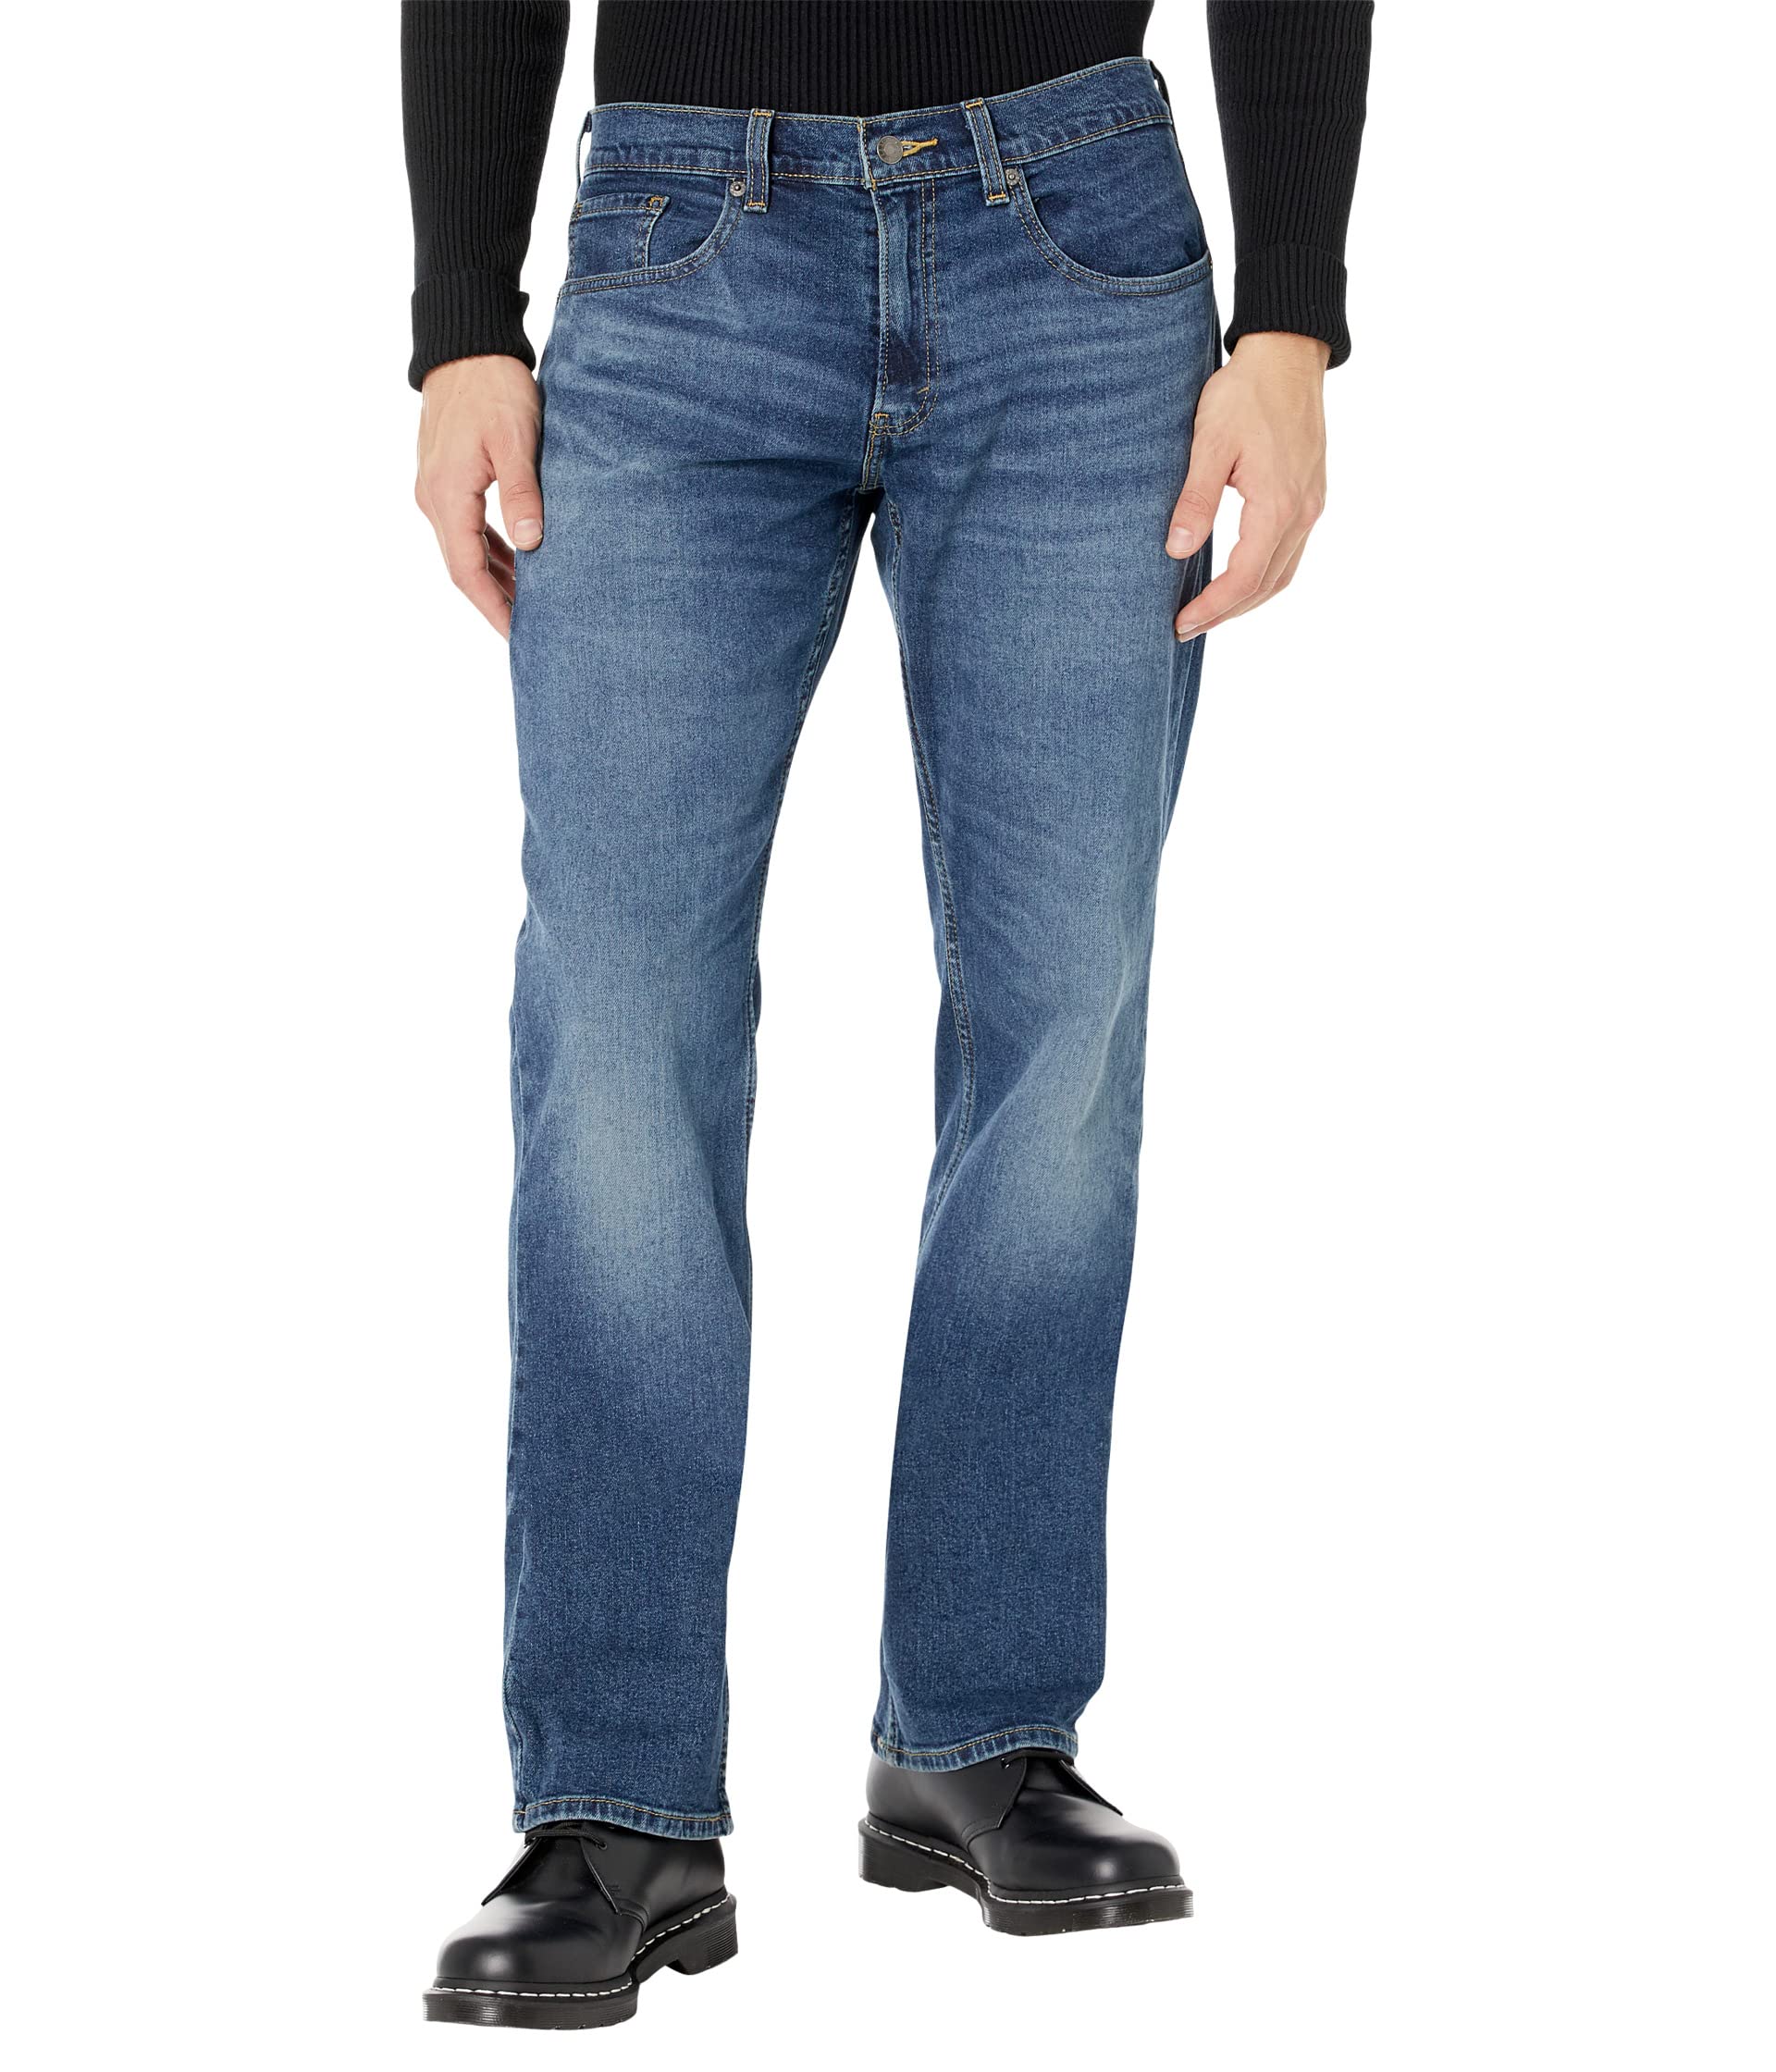 Джинсы Signature by Levi Strauss & Co. Gold Label, Relaxed Fit Jeans рубашка levi strauss из хлопка 50 размер